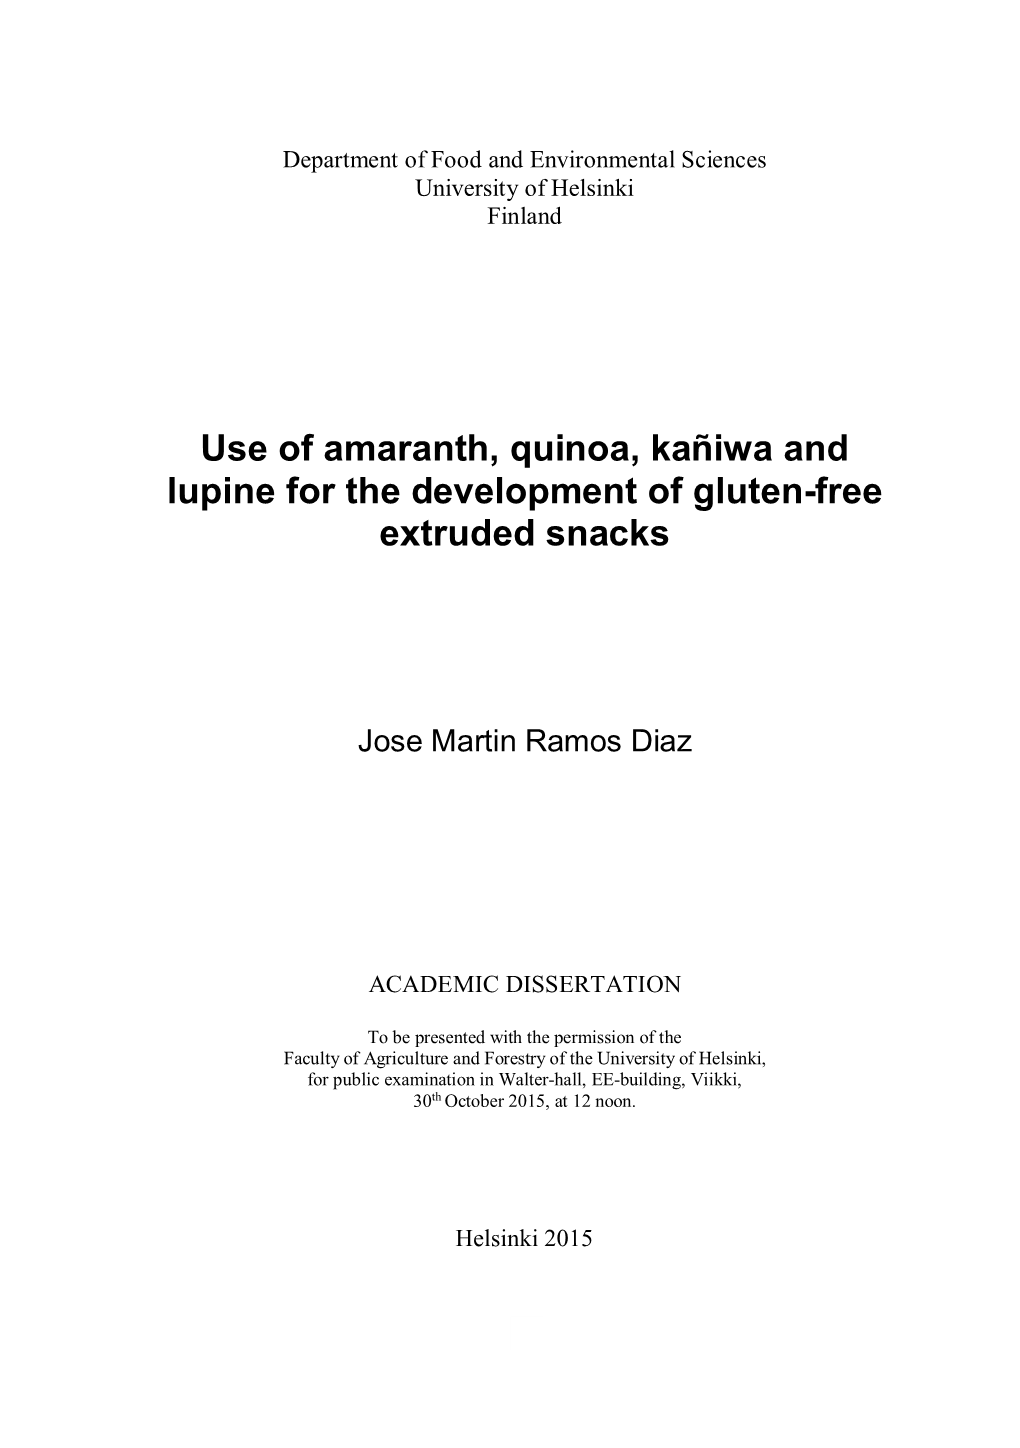 Use of Amaranth, Quinoa, Kañiwa and Lupine for the Development of Gluten-Free Extruded Snacks